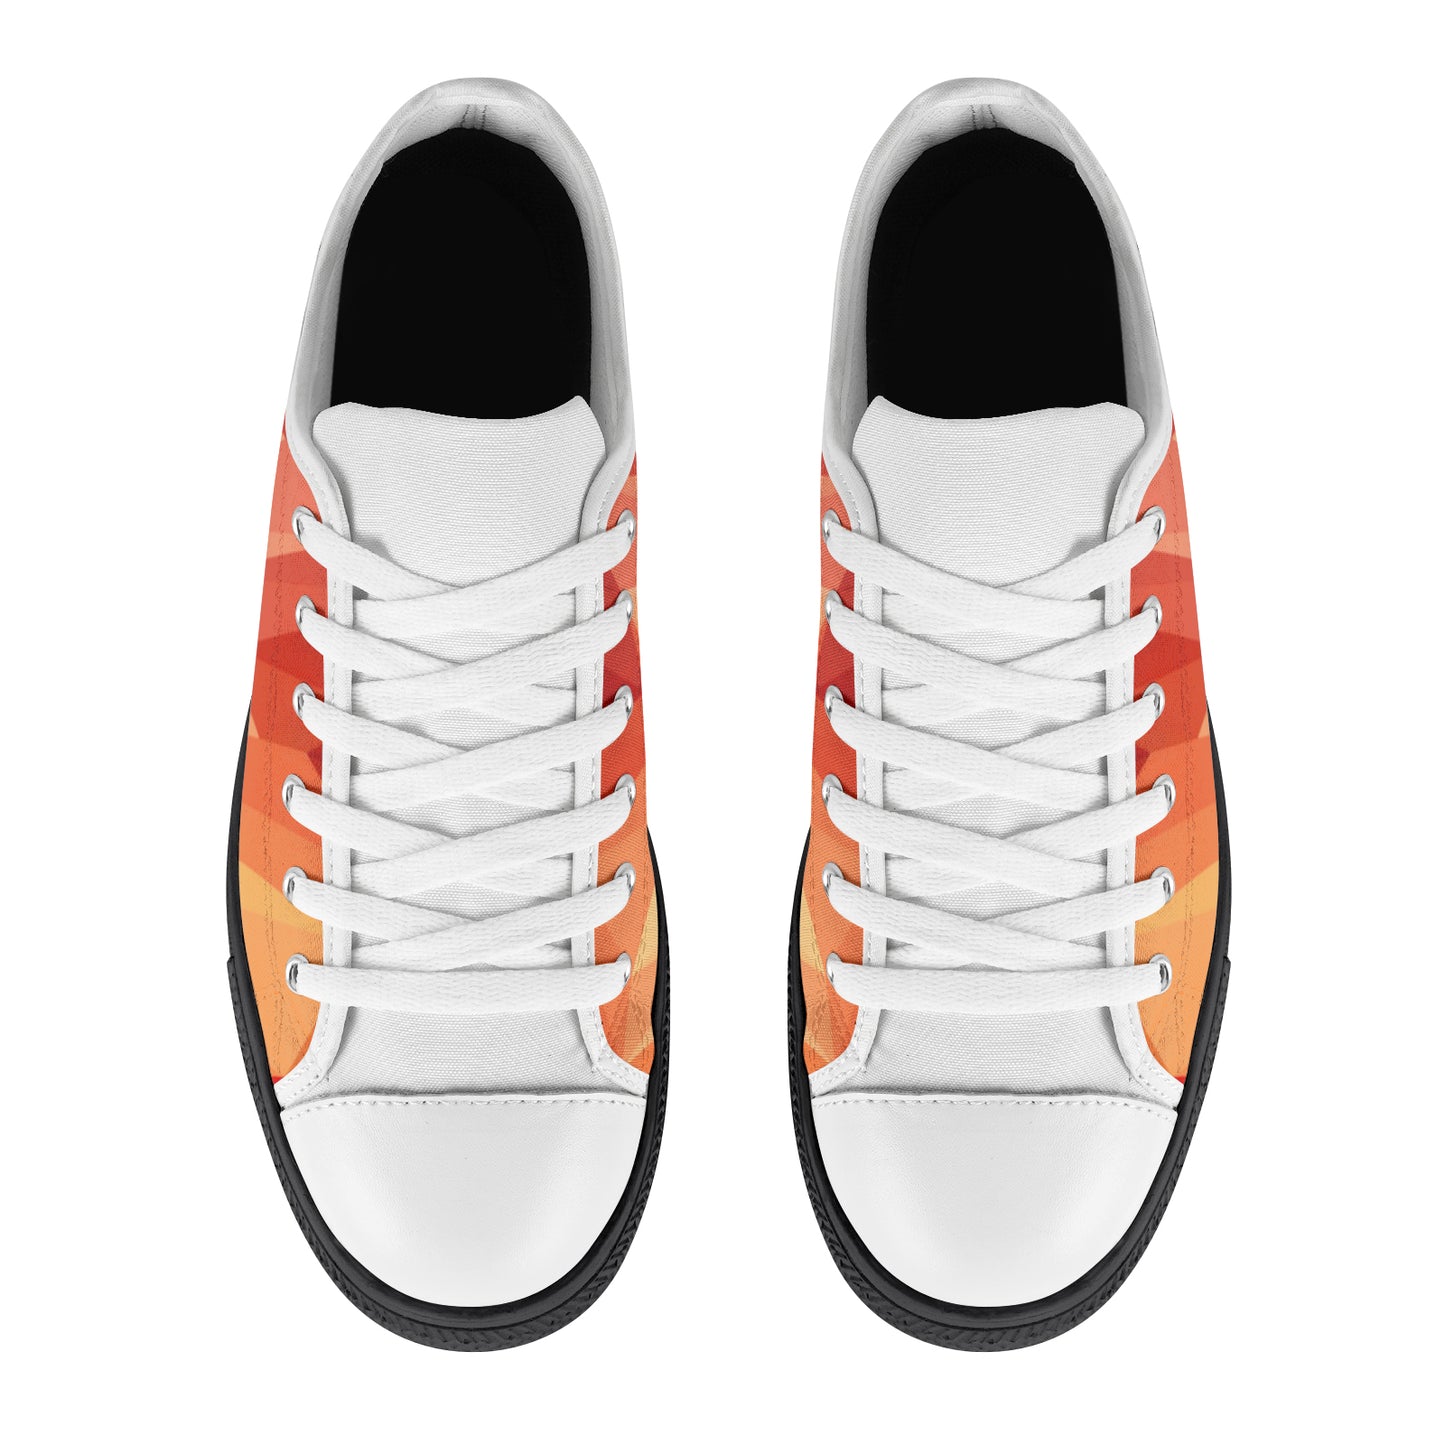 Men's Canvas Sneakers - Geometric Red